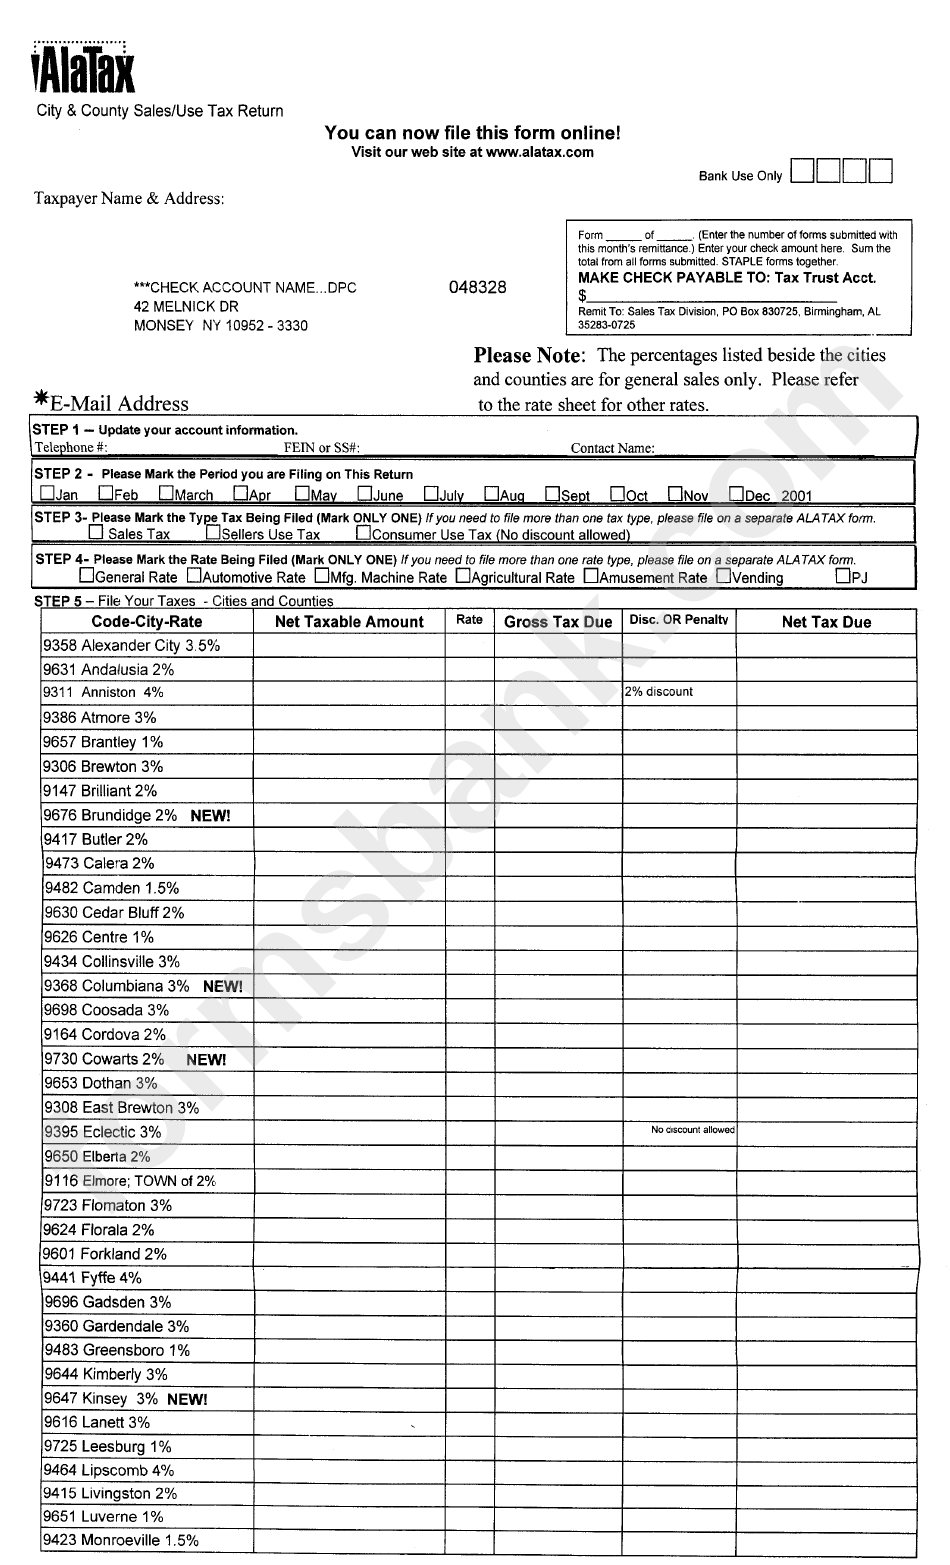 City & County Sales/use Tax Return Form